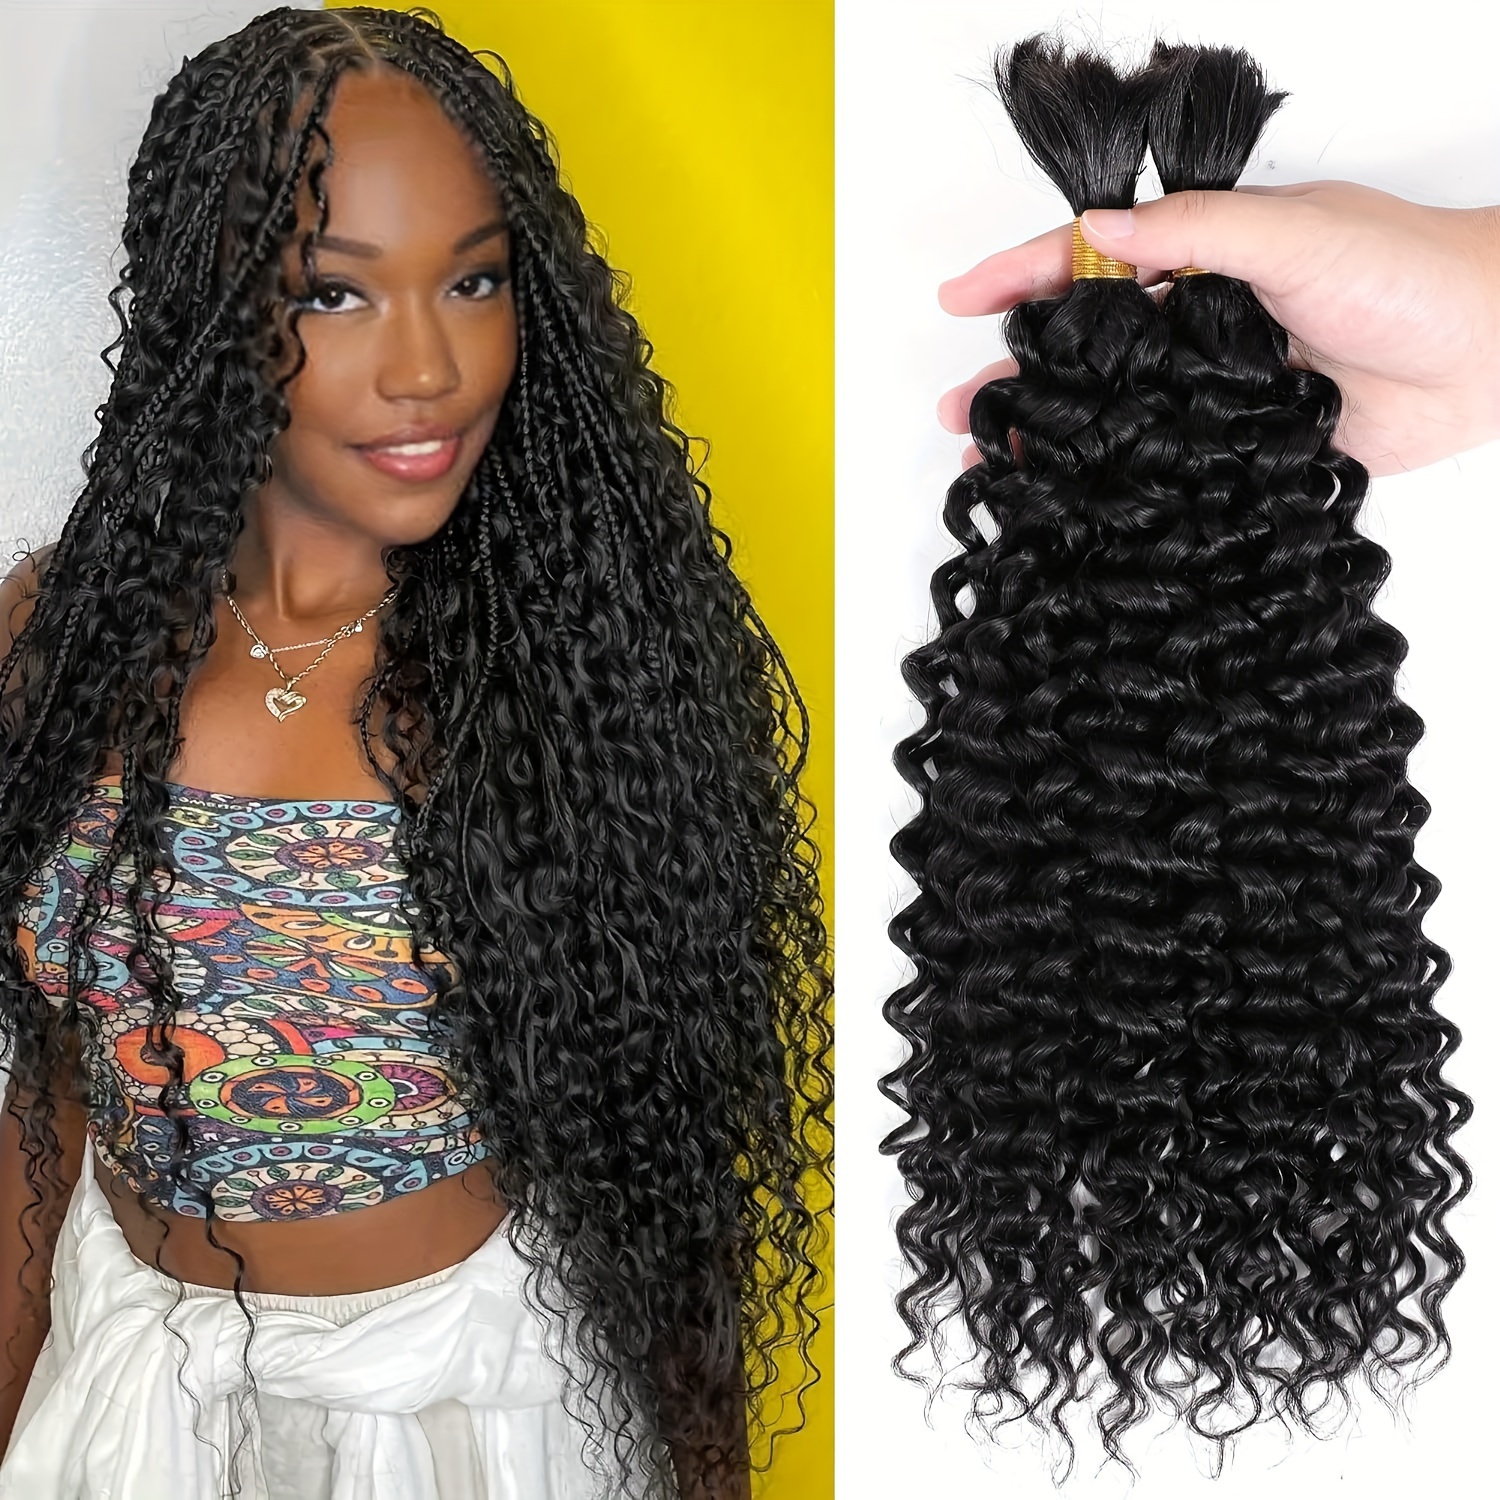 Boho Water Wave Cleopatra Human Braiding Hair For Braiding Double Drawn, No  Weft, Curly Bundles Style 231007 From Heng04, $99.24